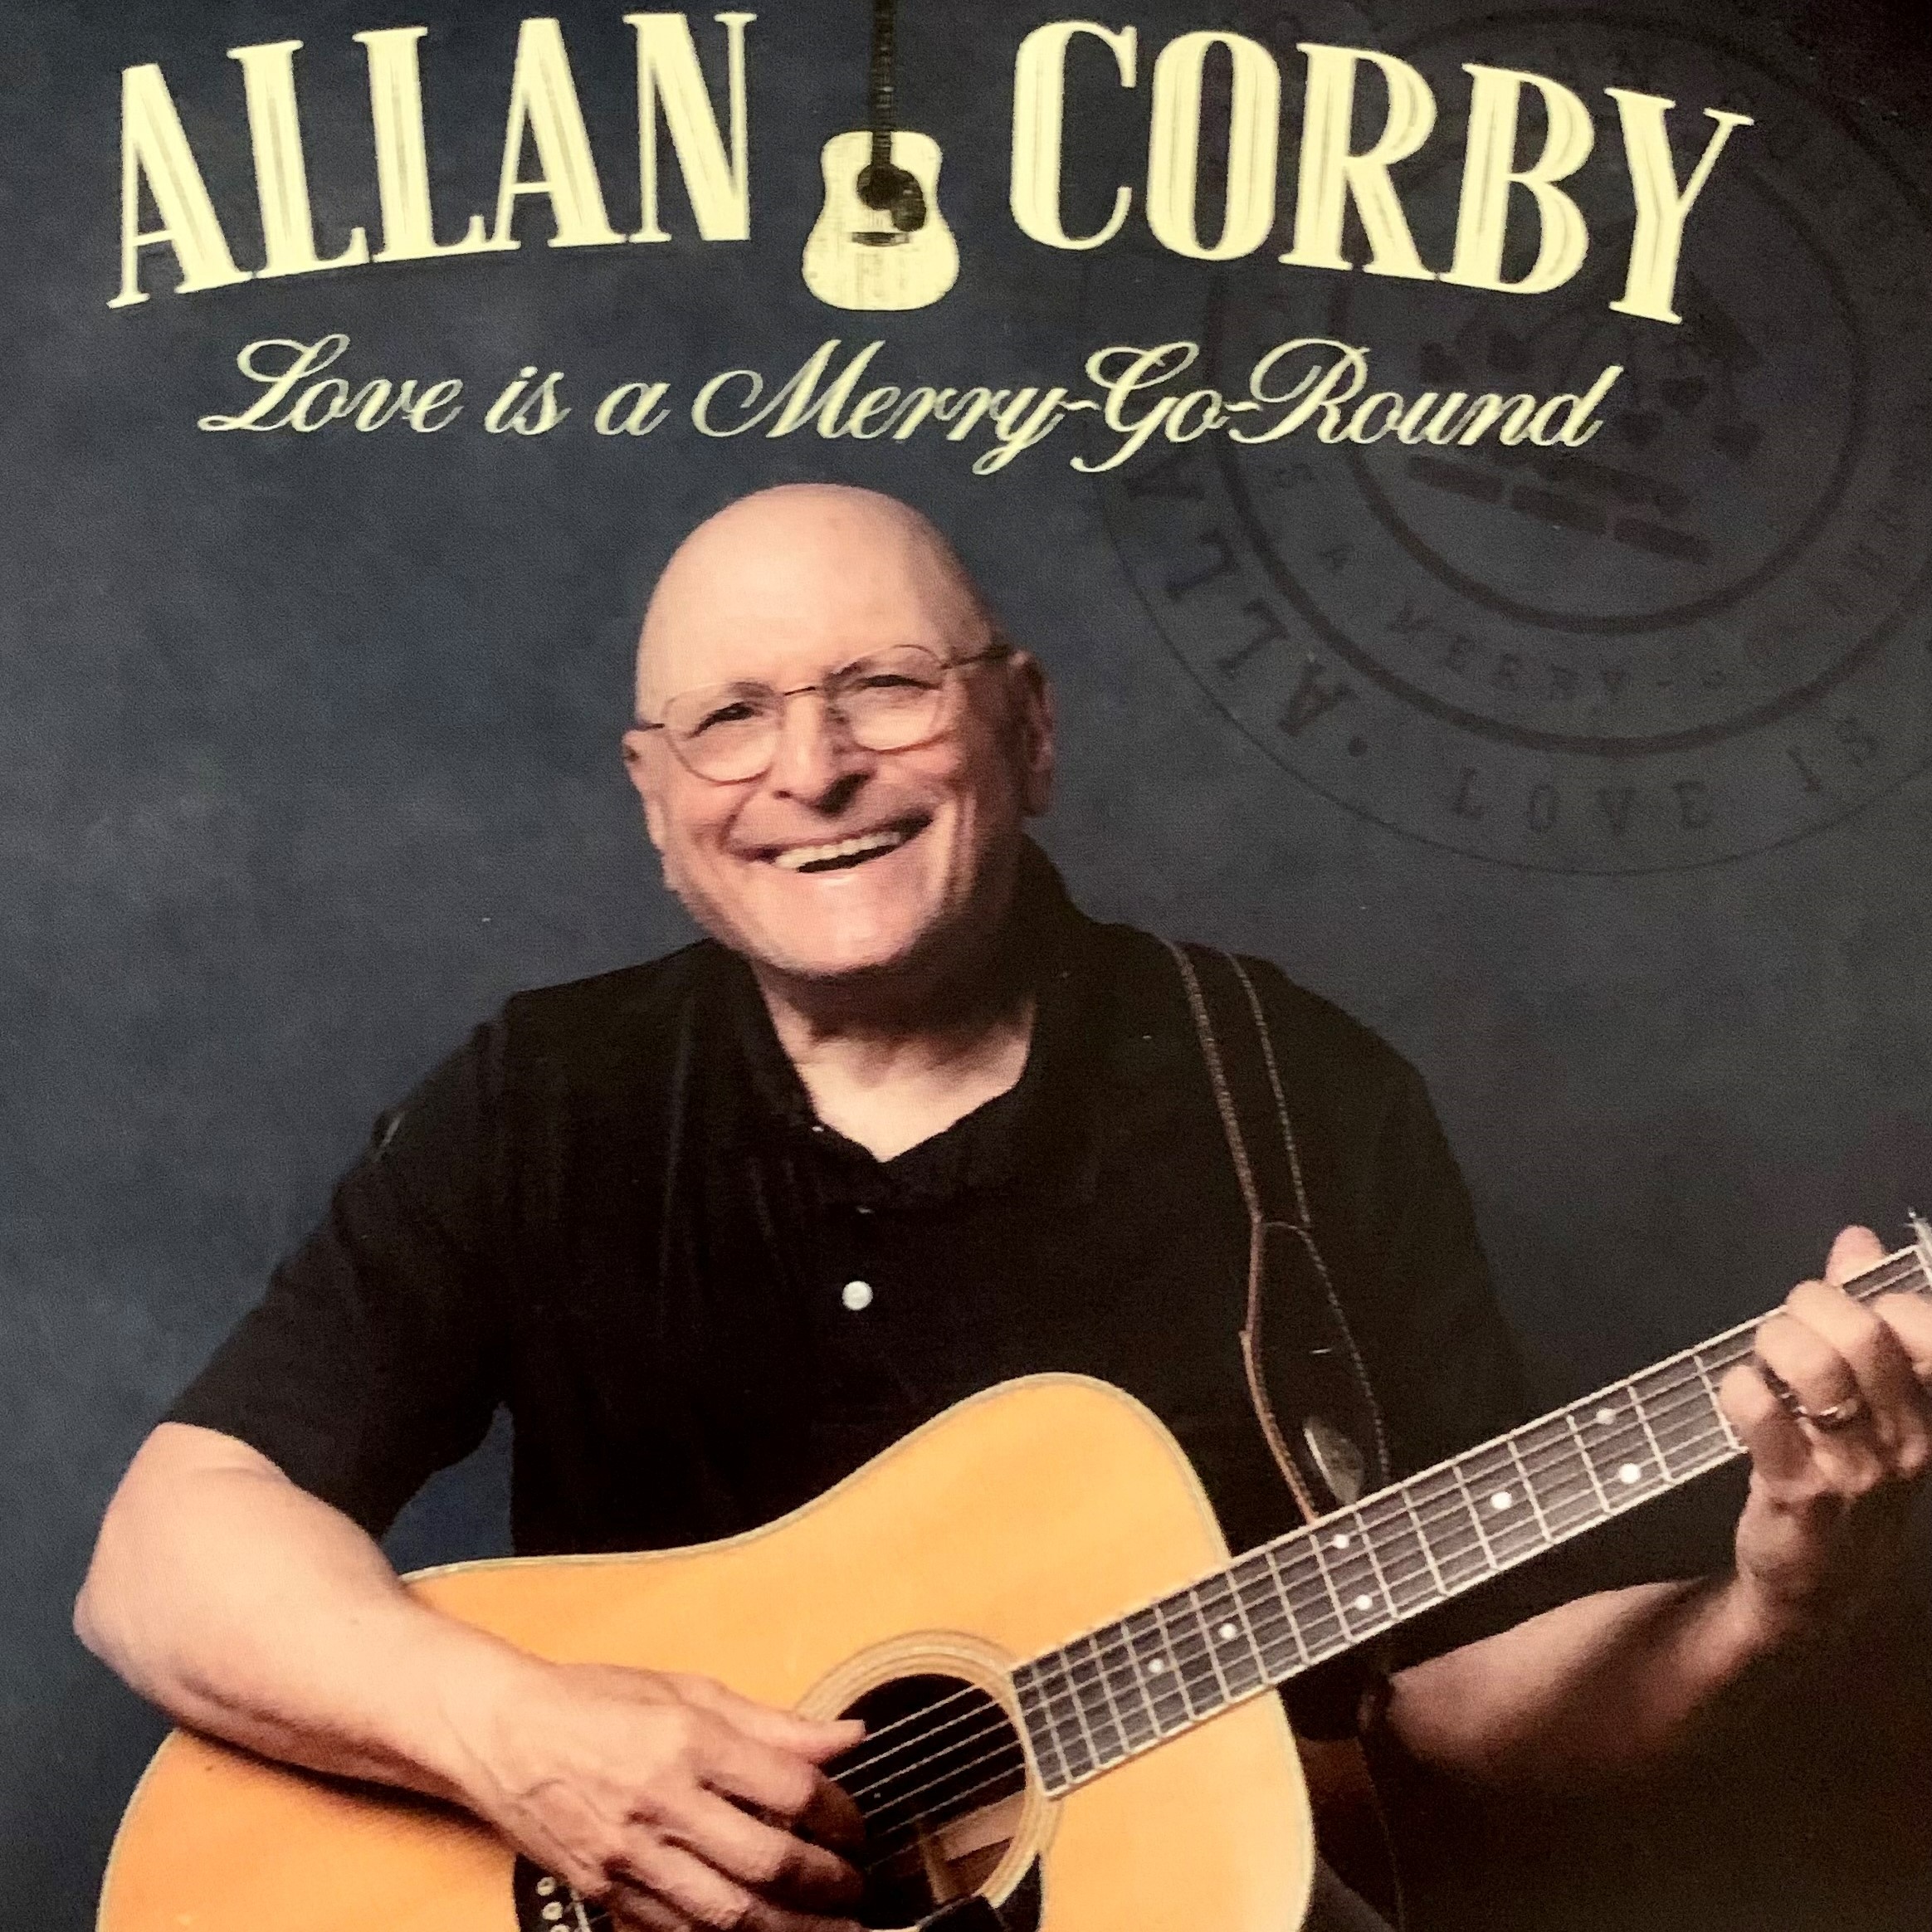 Allan Corby Inspires with the Guitar in Latest Album, "Love is A Merry-Go-Round"